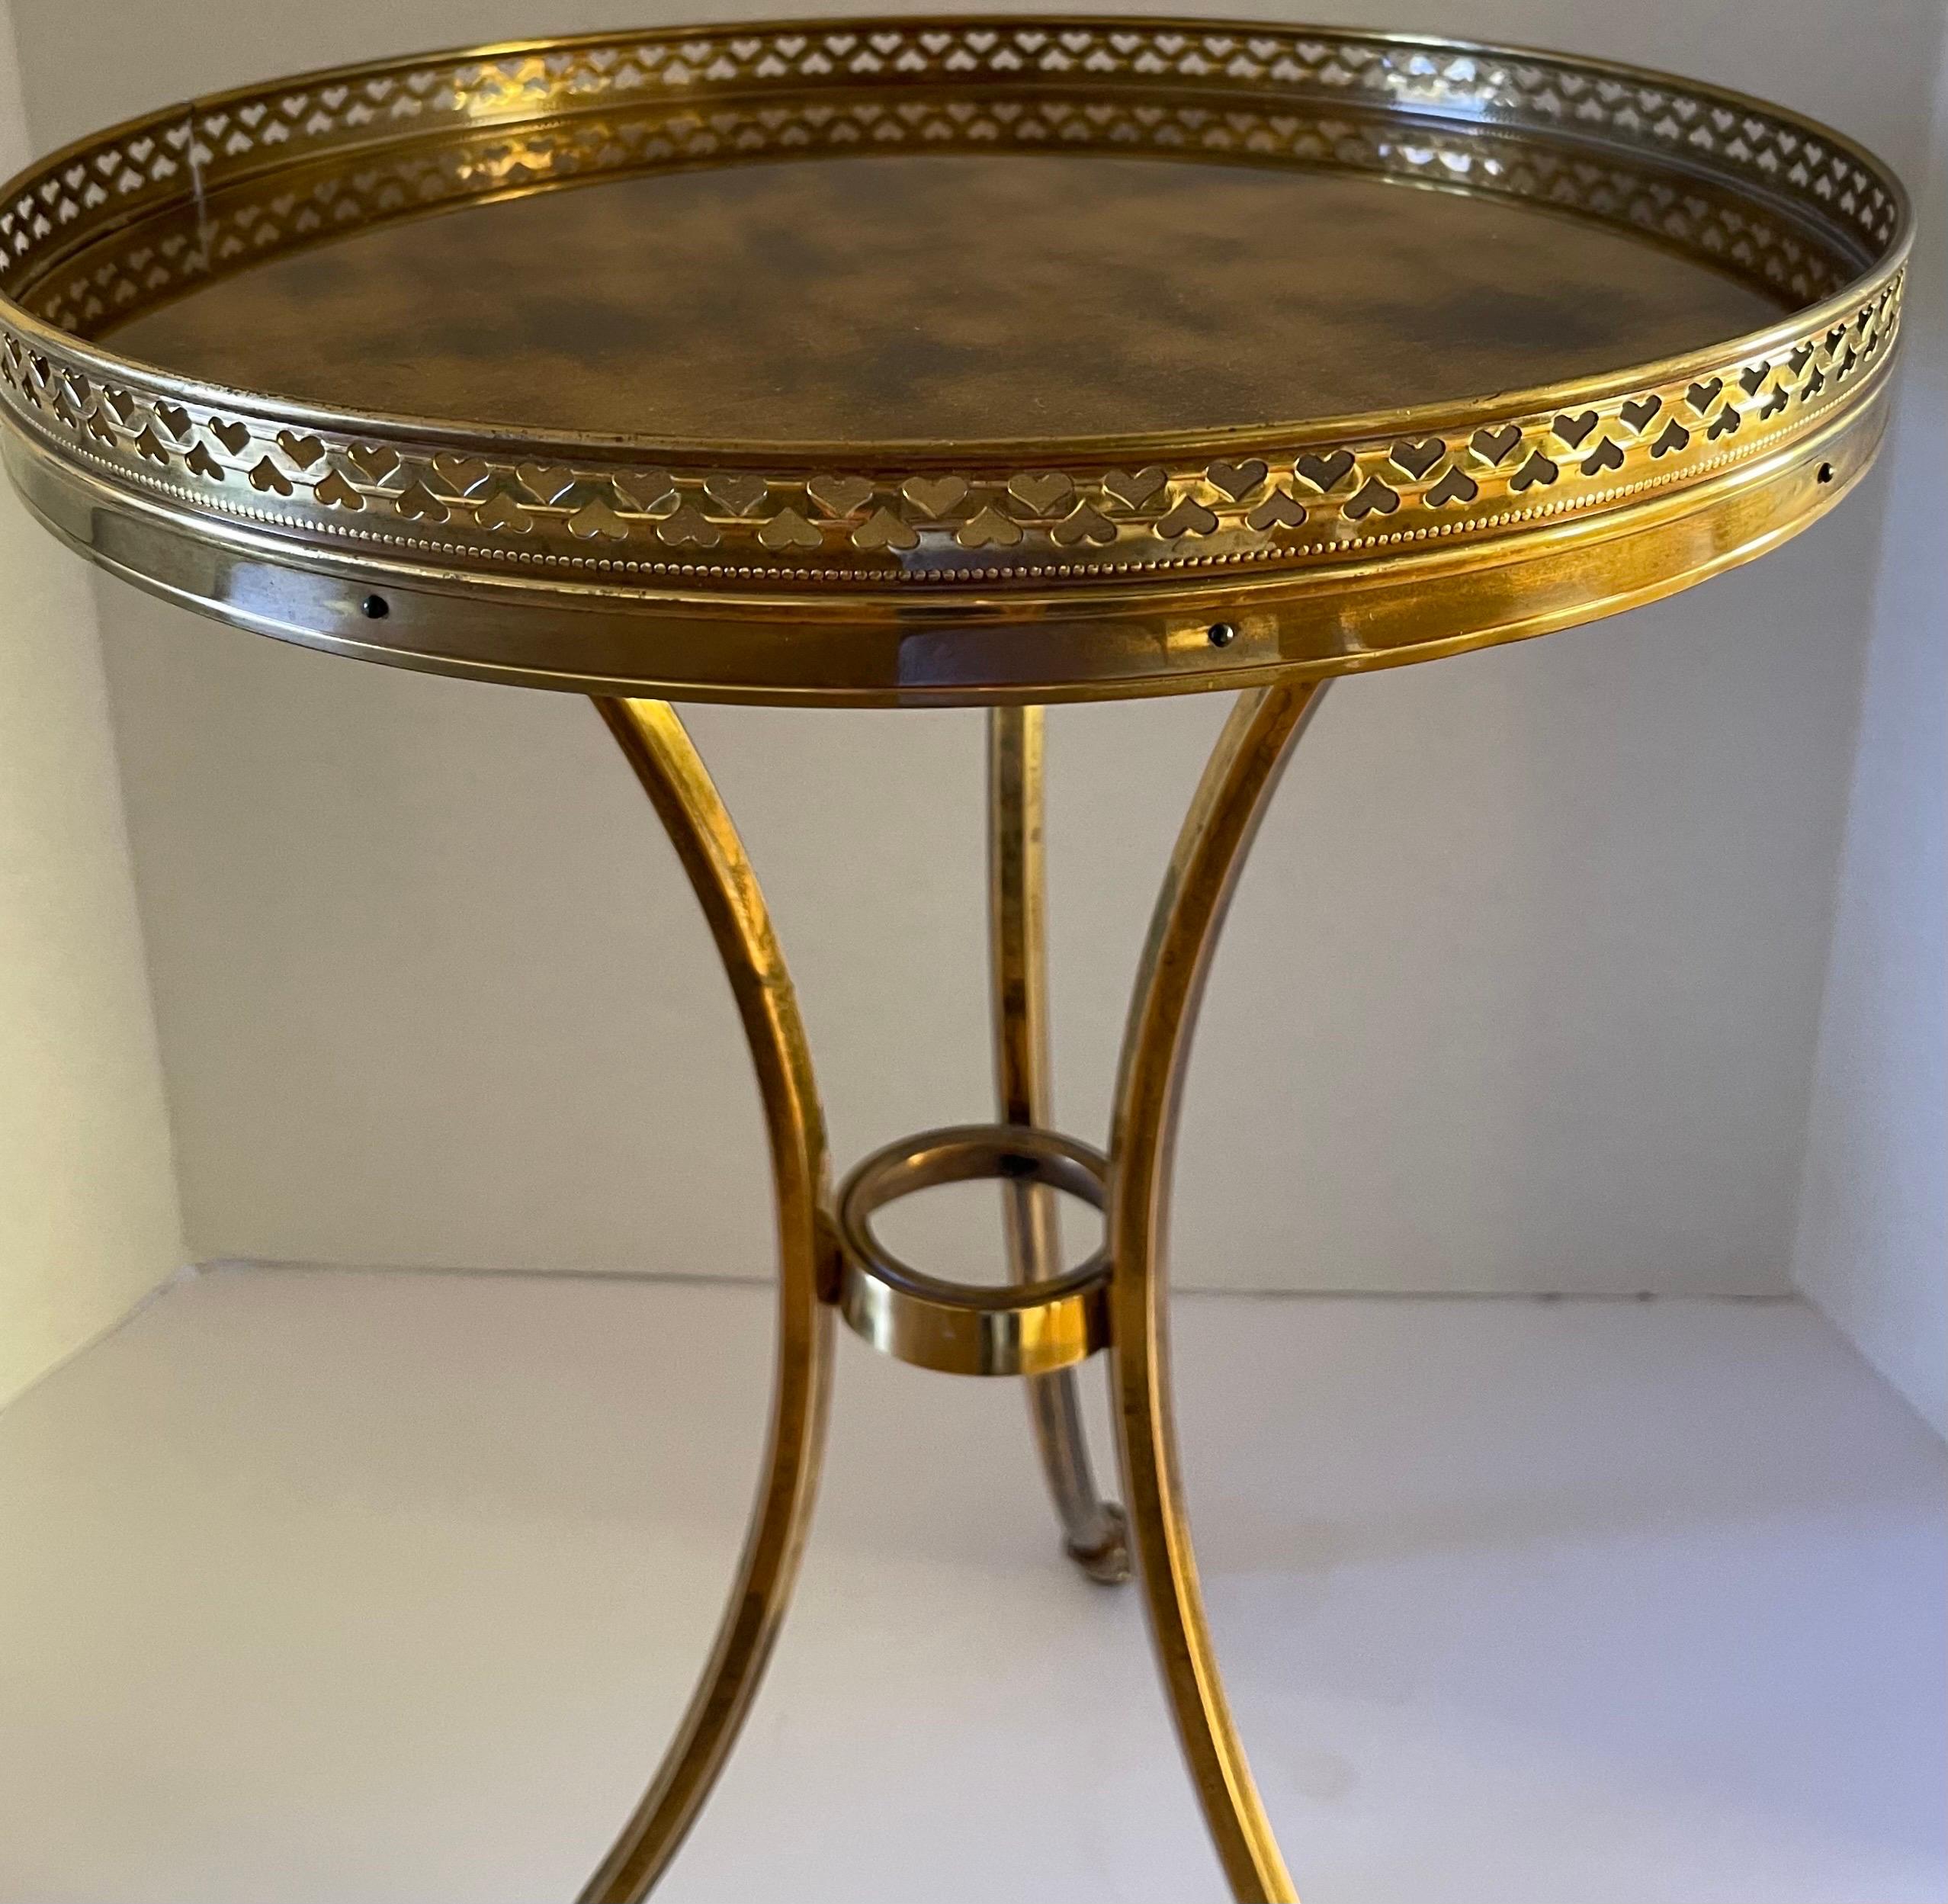 Mid-20th Century Neoclassical Antique Brass Gueridon Side Table